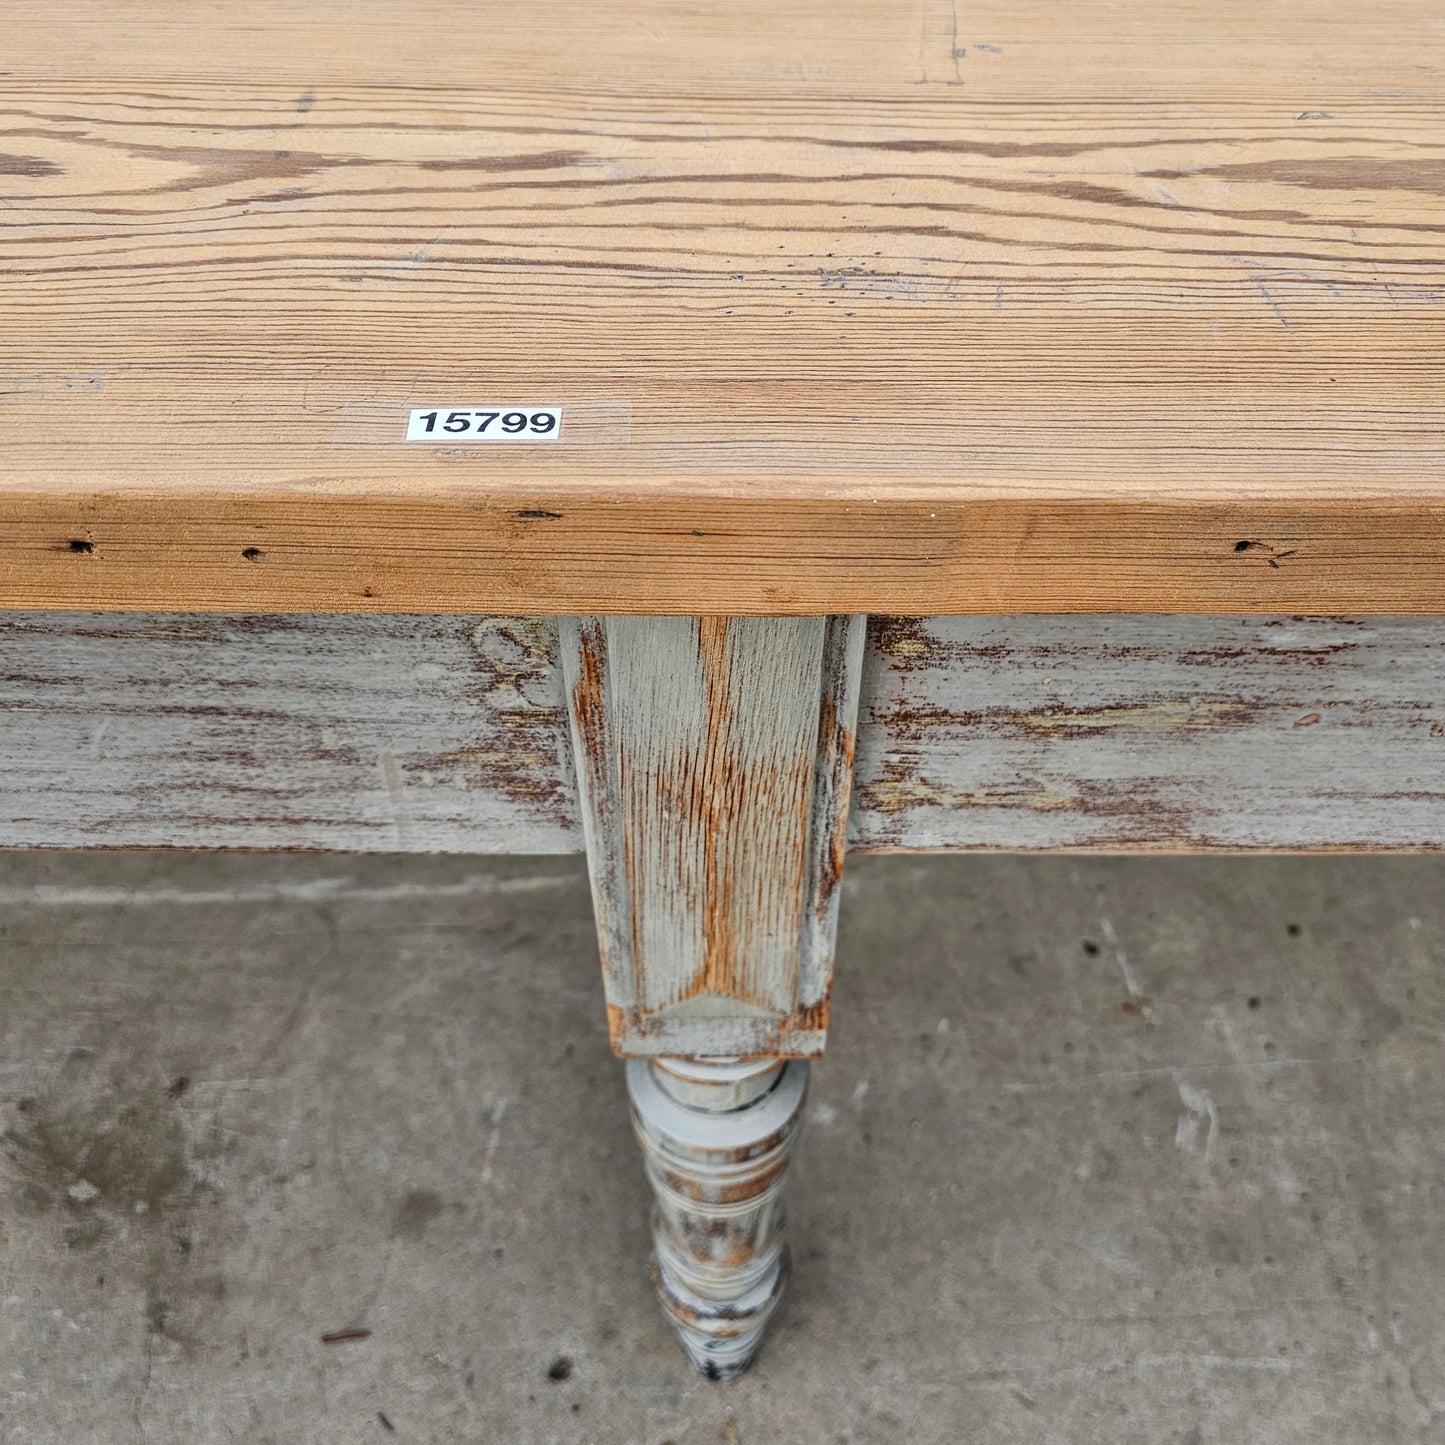 Painted Country Store Display Dining Table